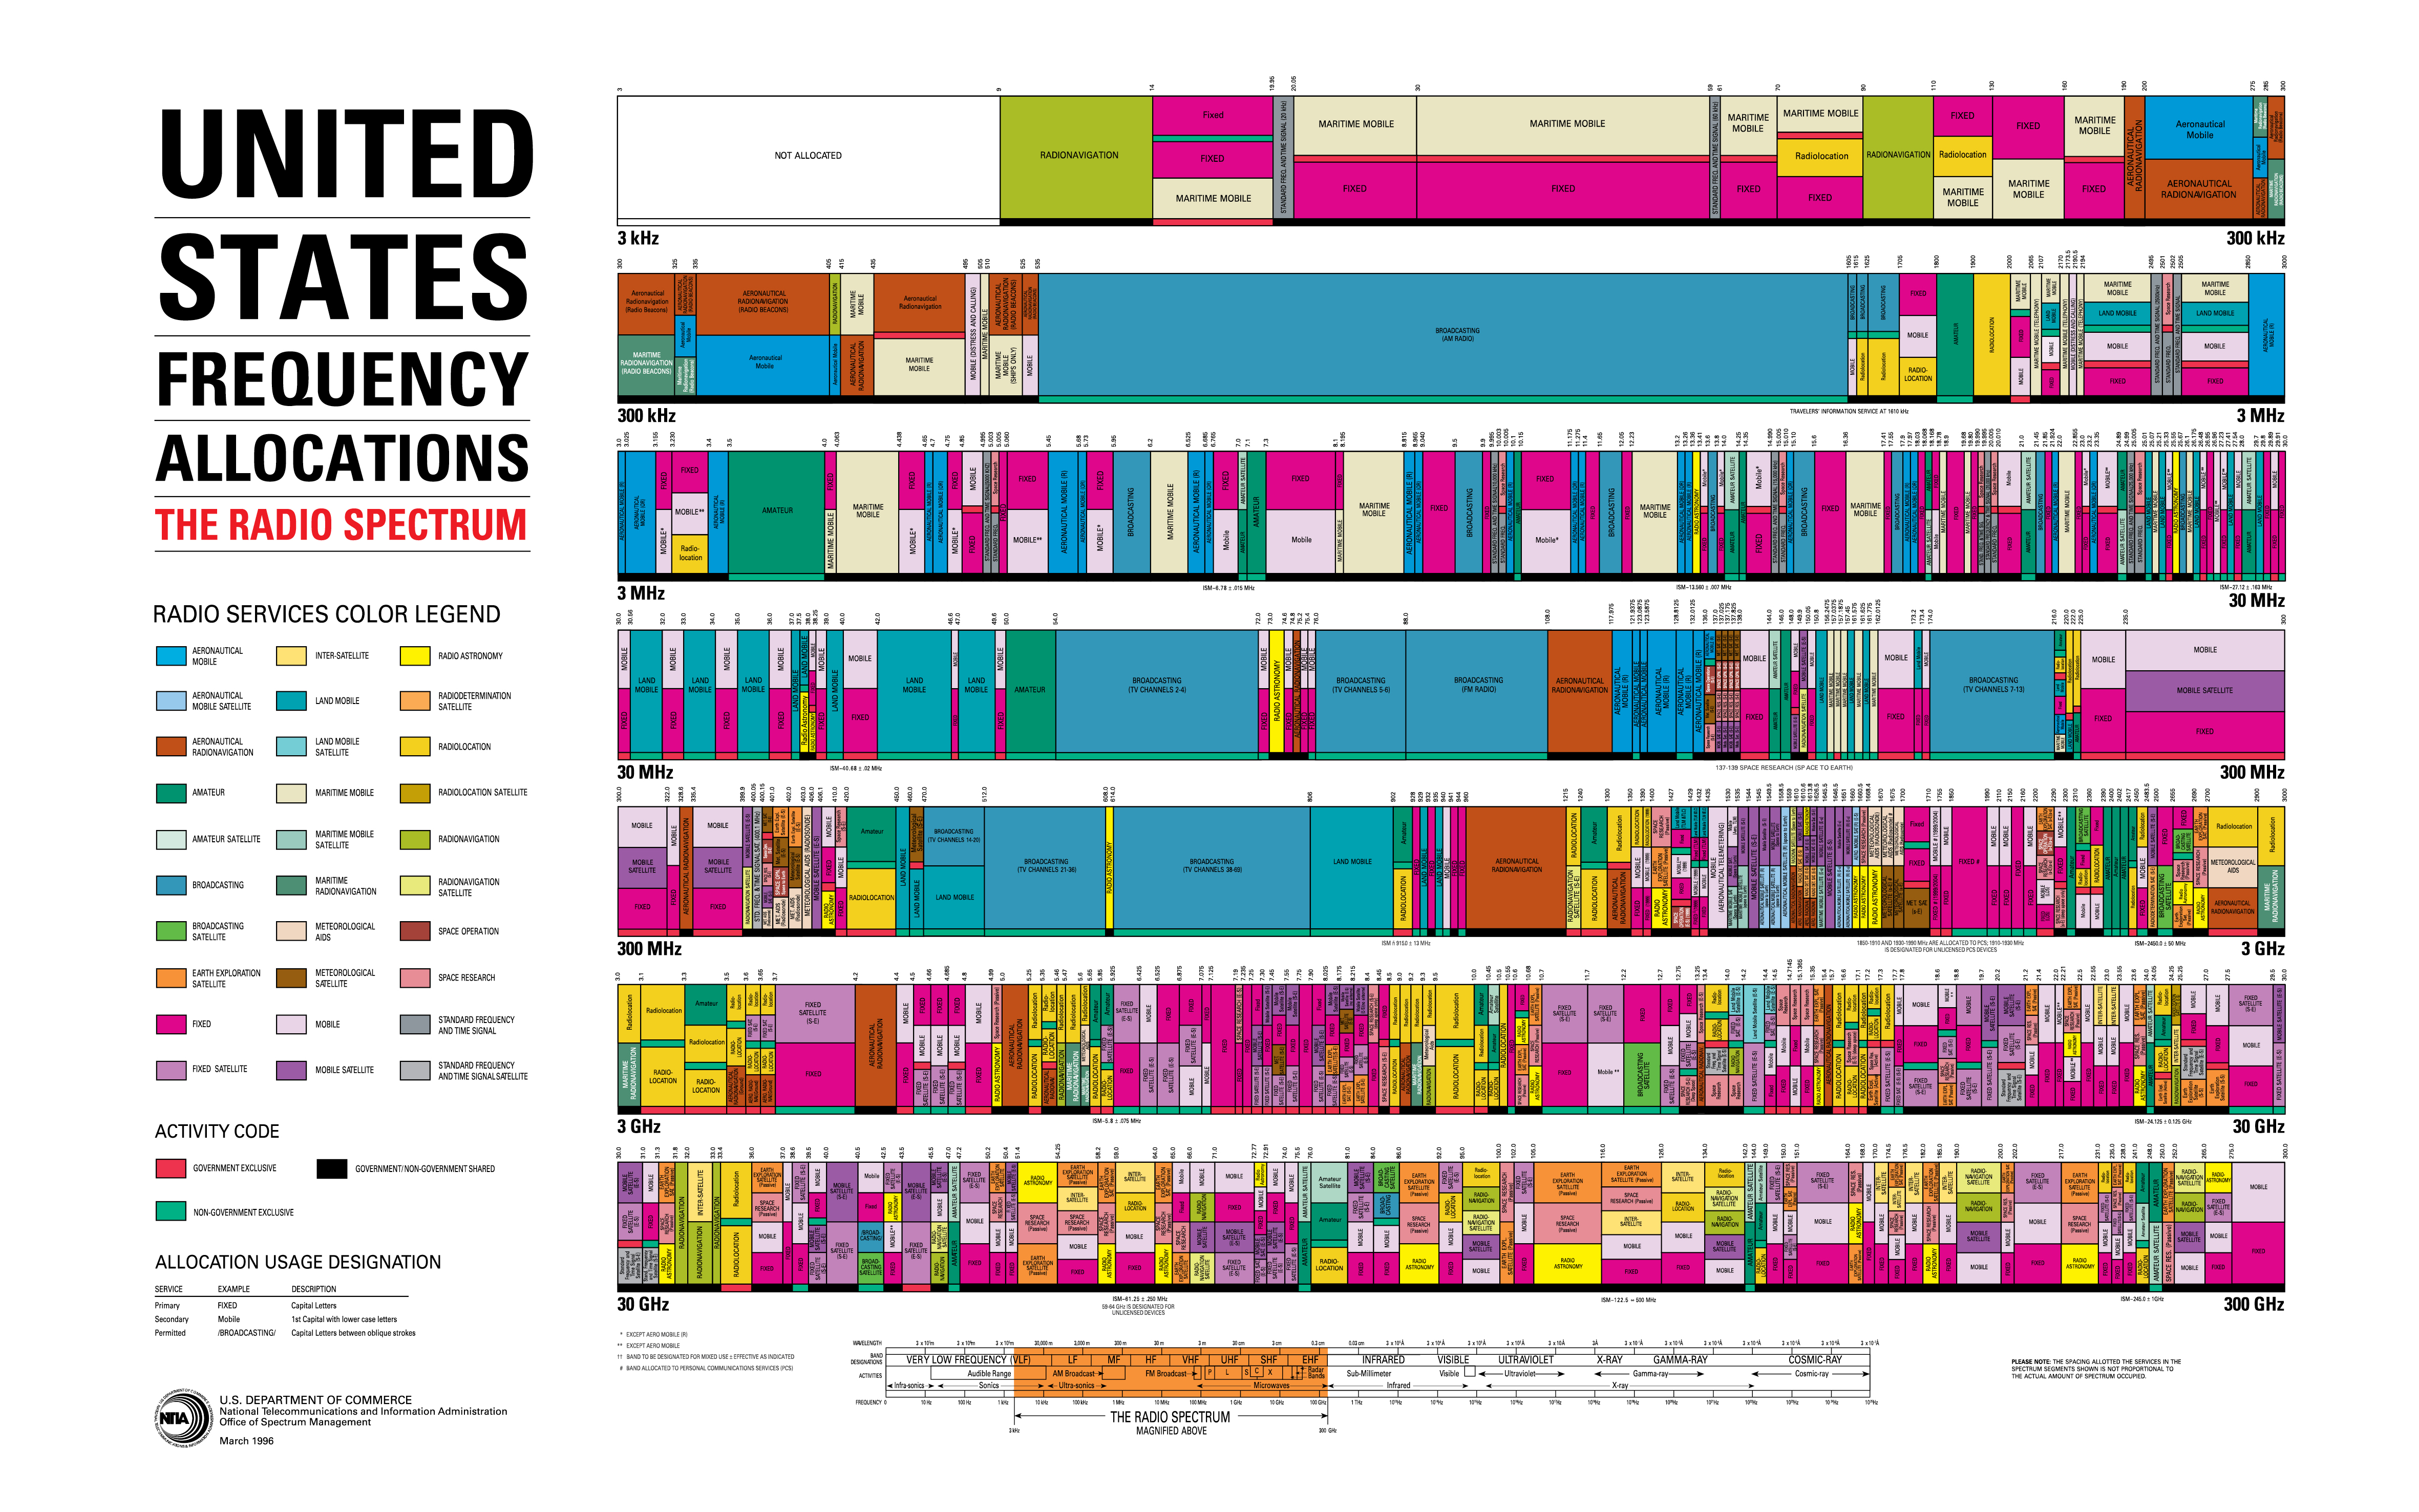 Chart issued in March nineteen eight-six by the US Department of Commerce’s National Telecommunications and Information Administration Office of Spectrum Management. The chart shows the usages allocated in the United States to various frequencies across the so-called radio spectrum.